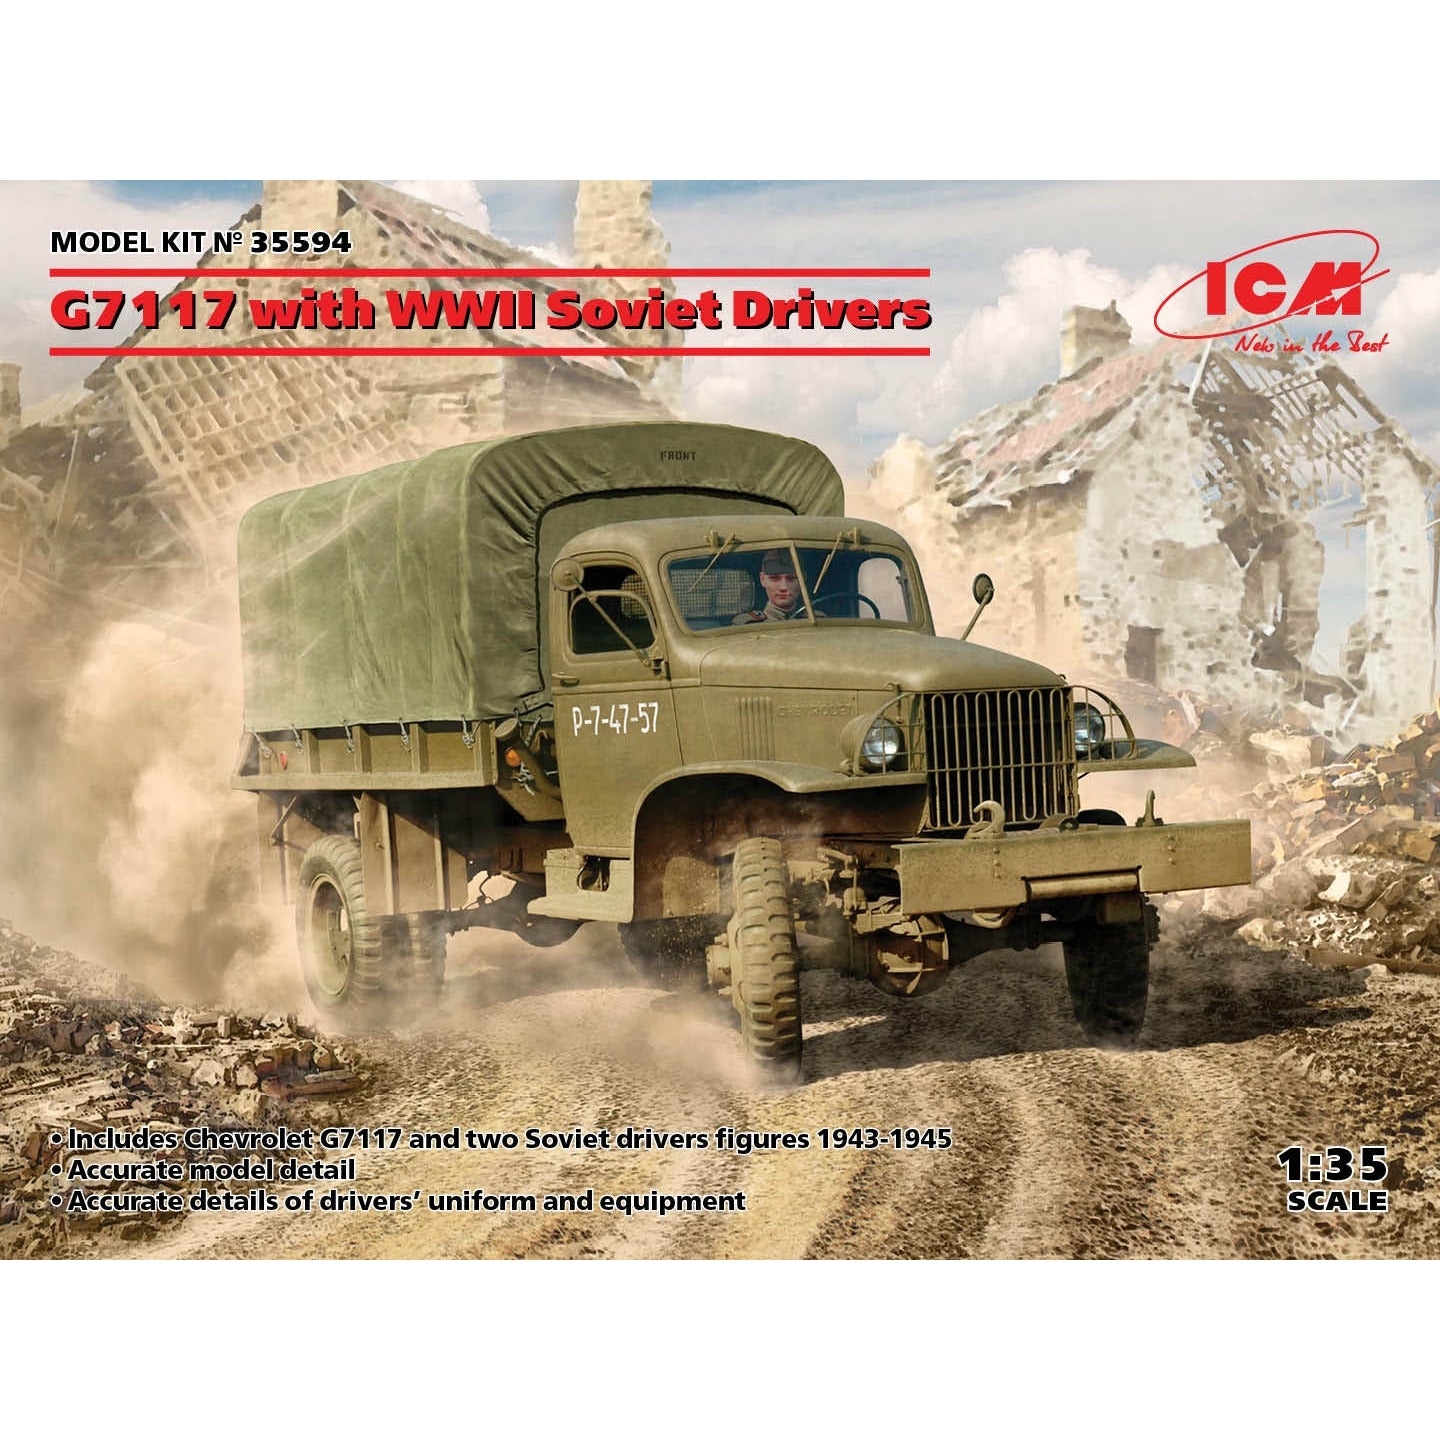 G7117 with WWII Soviet Drivers 1/35 #35594 by ICM